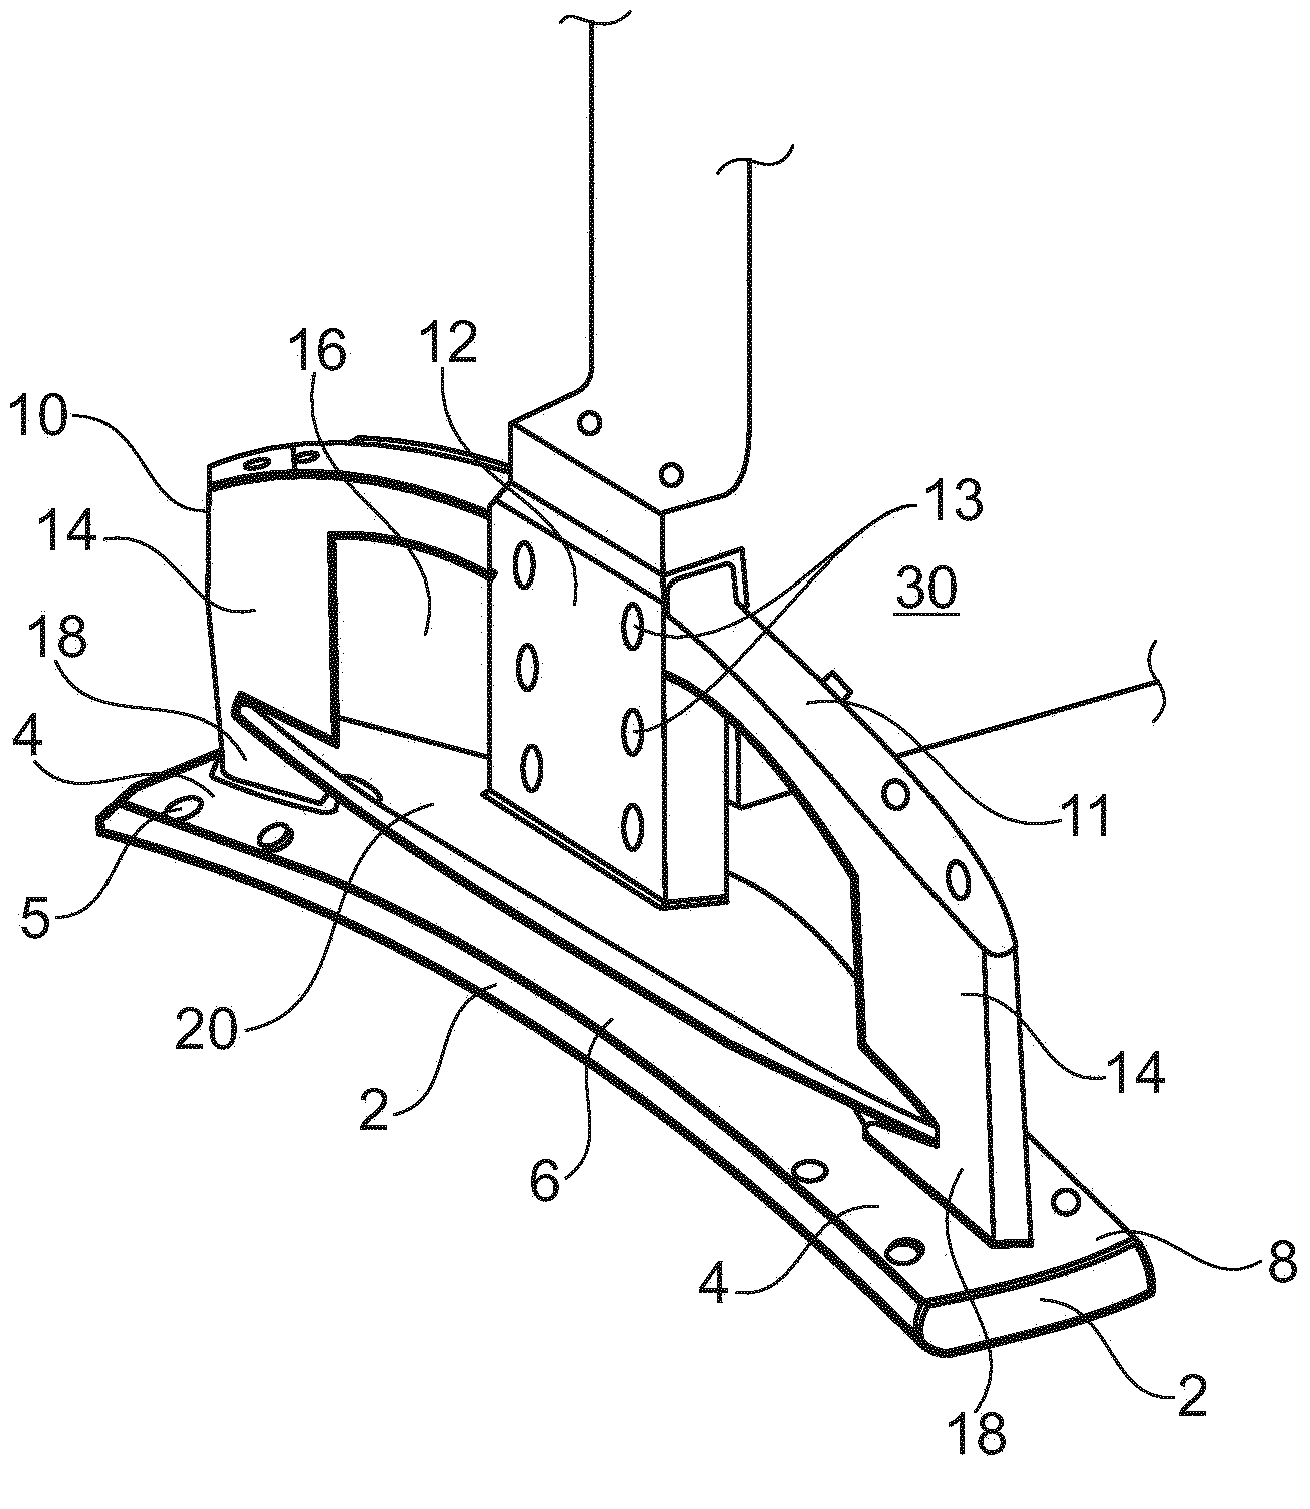 Guide shoe for a guiding device of a plastic processing machine clamping unit